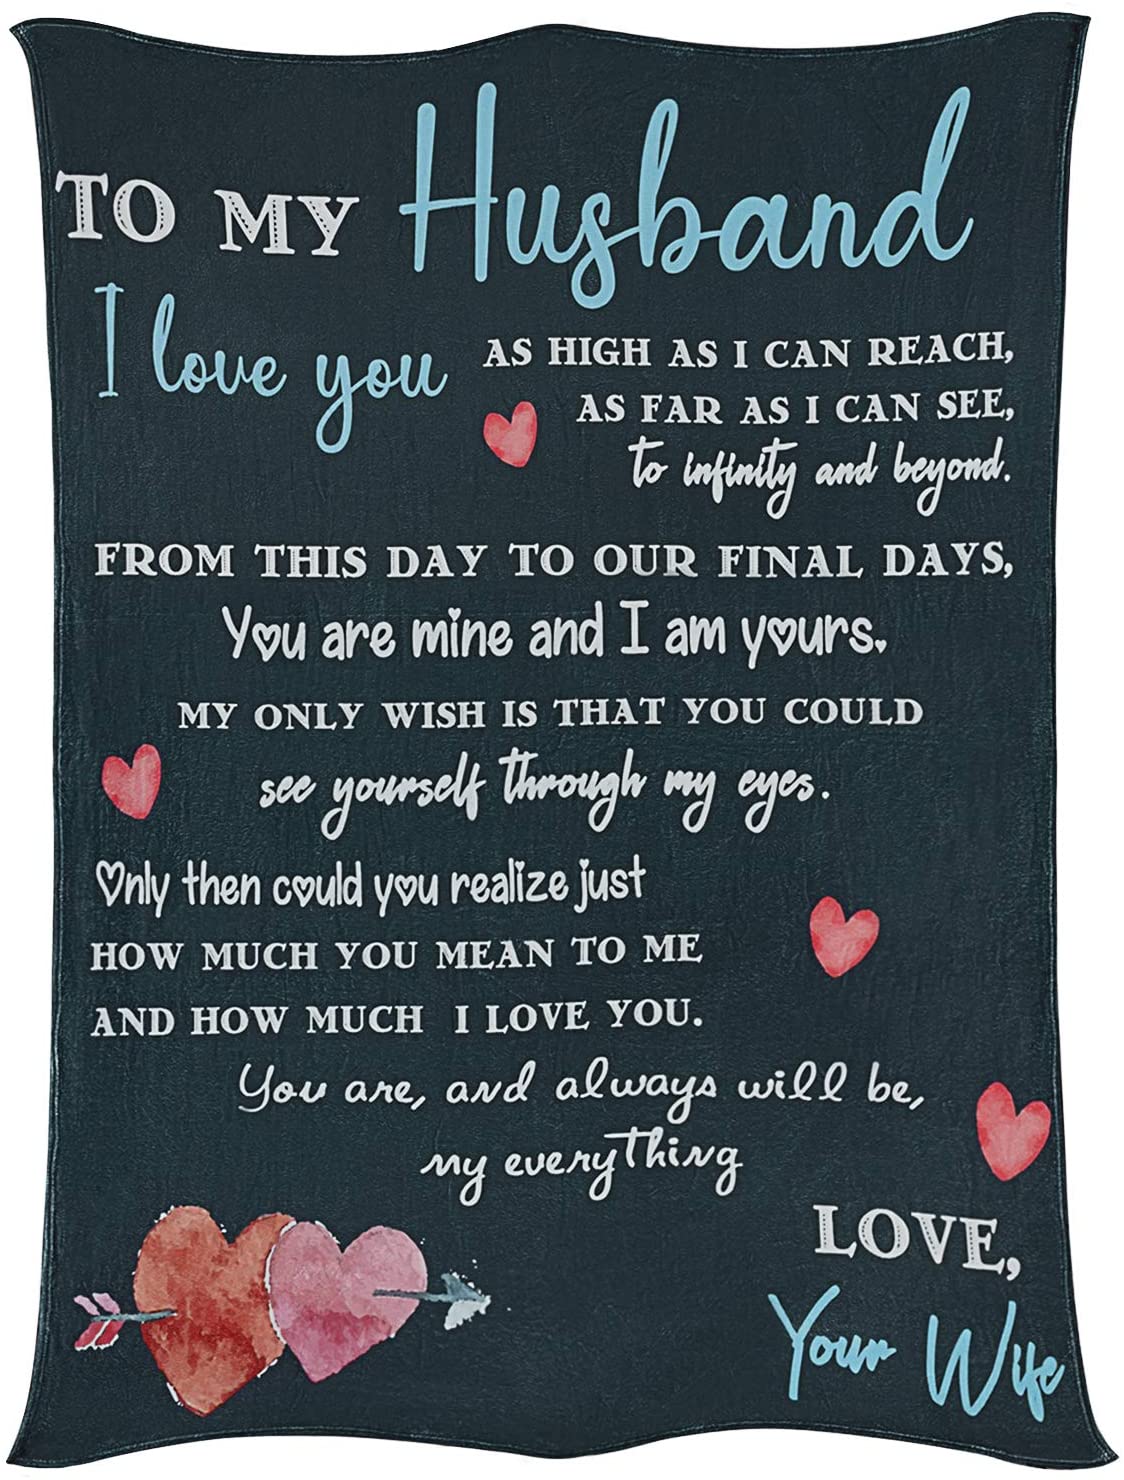 To My Husband Blanket, For Husband From Wife I Love You Flannel Blanket, To My Husband From Wife, Blanket For Couple Anniversary, Husband Valentines Day, Best Gift Ideas For Husband